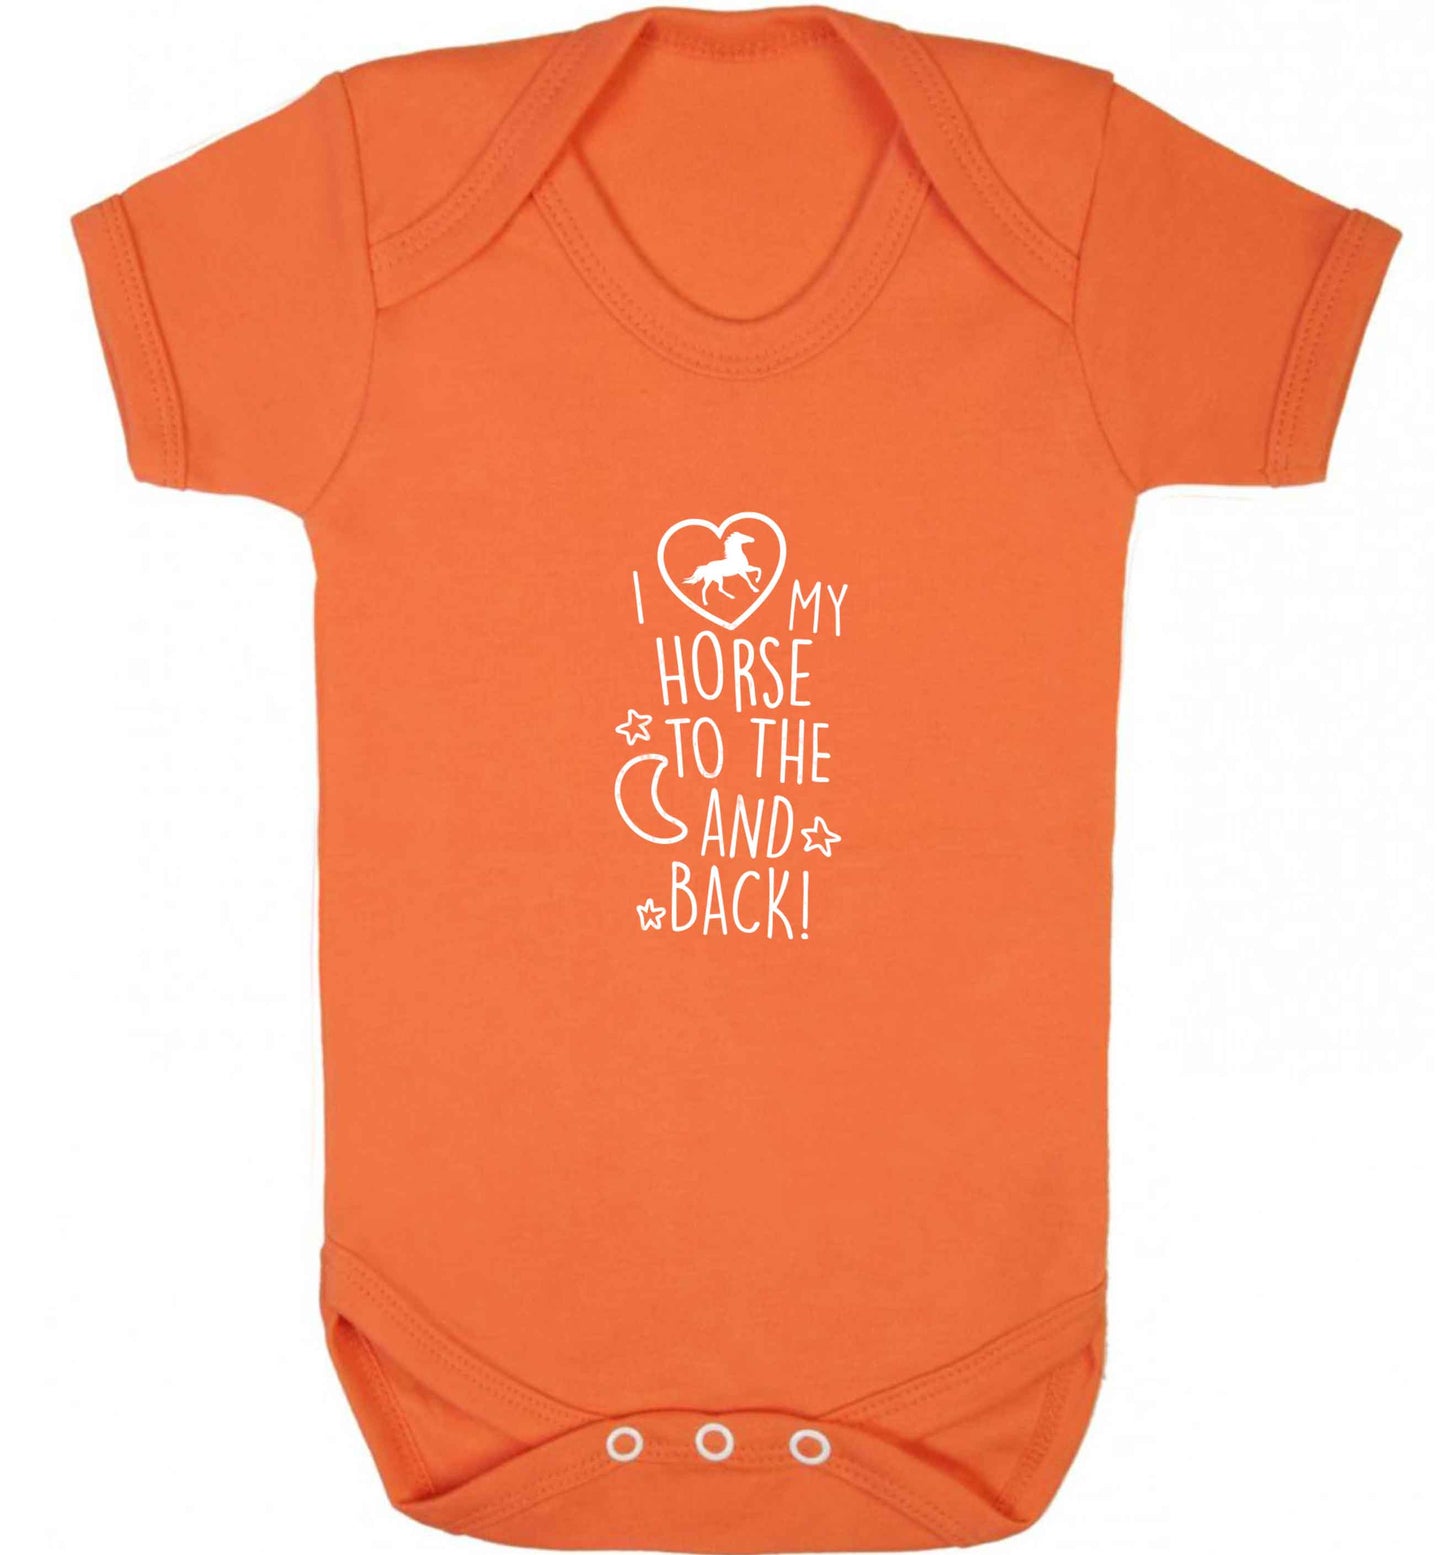 I love my horse to the moon and back baby vest orange 18-24 months